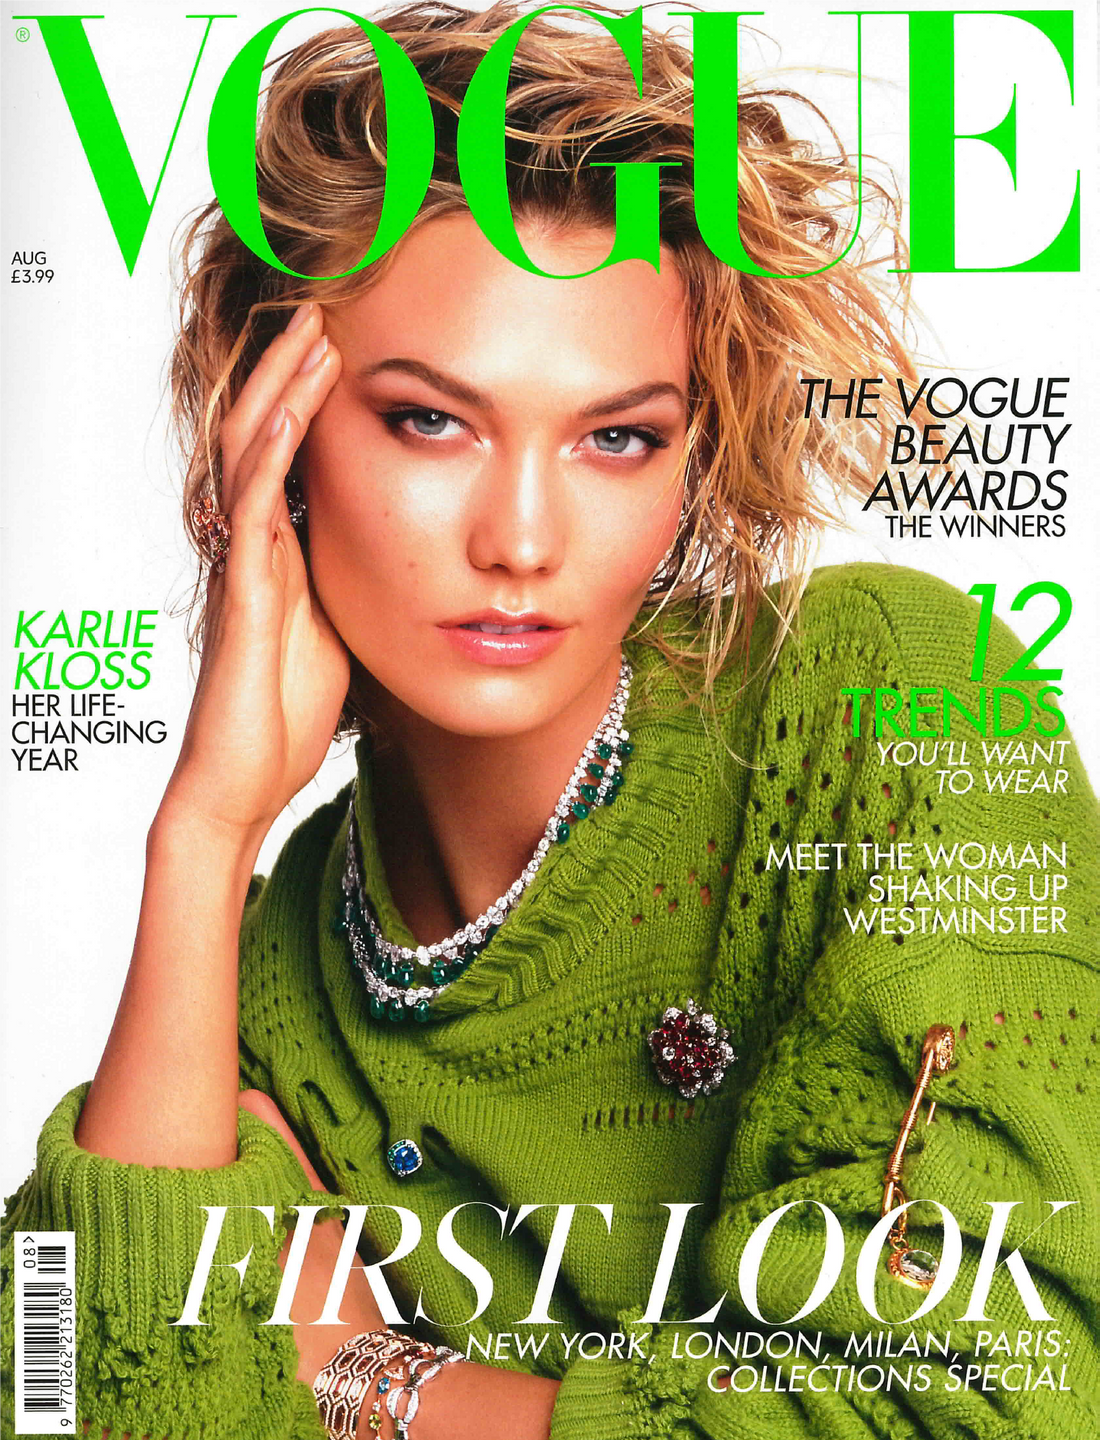 Summertime Chic at British Vogue's August Issue!